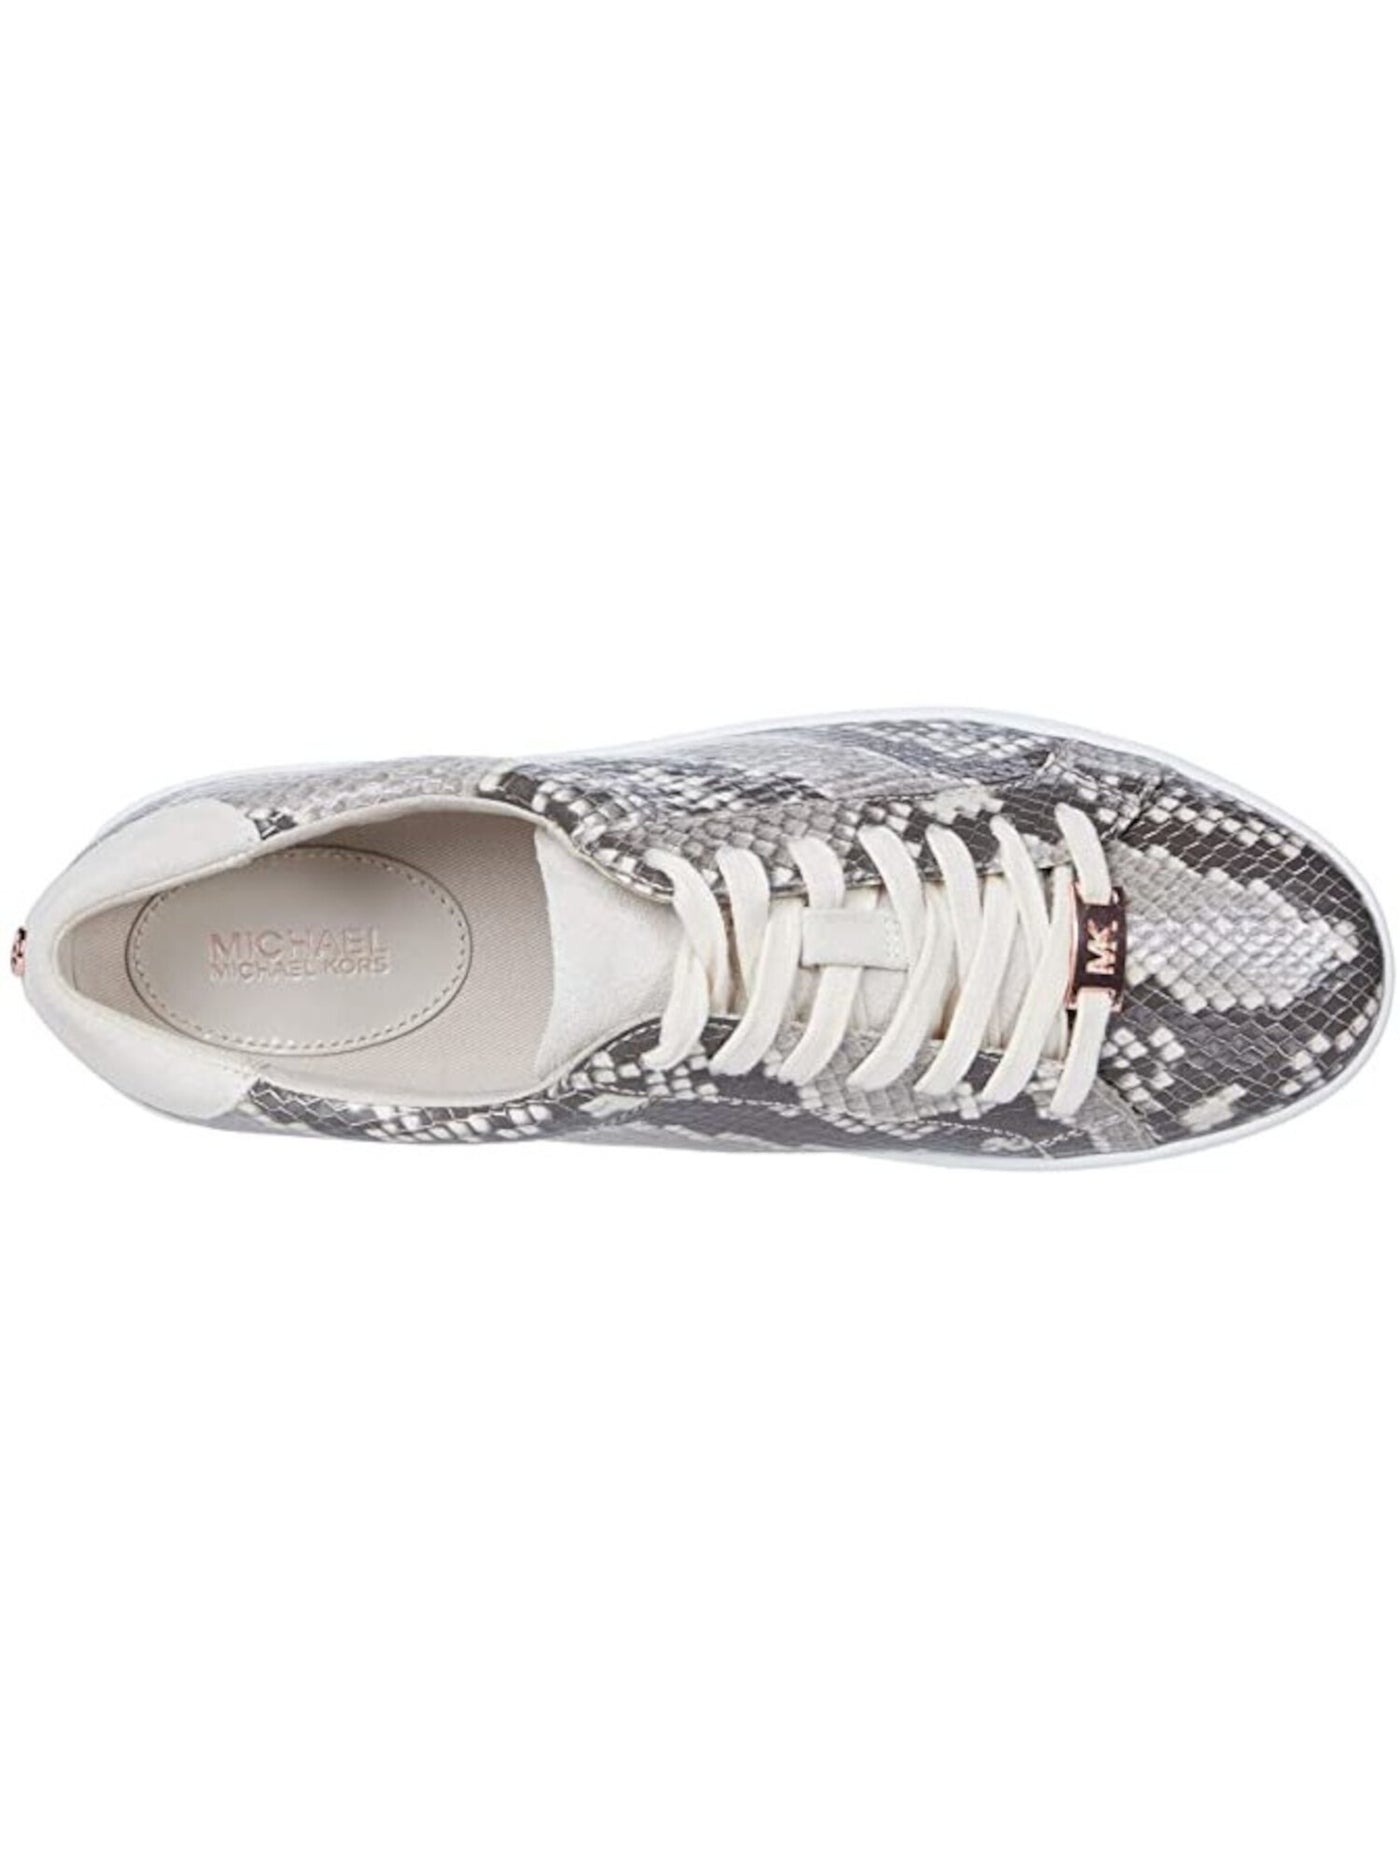 MICHAEL KORS Womens Beige Snake Logo Comfort Irving Round Toe Platform Lace-Up Leather Athletic Sneakers Shoes 6.5 M